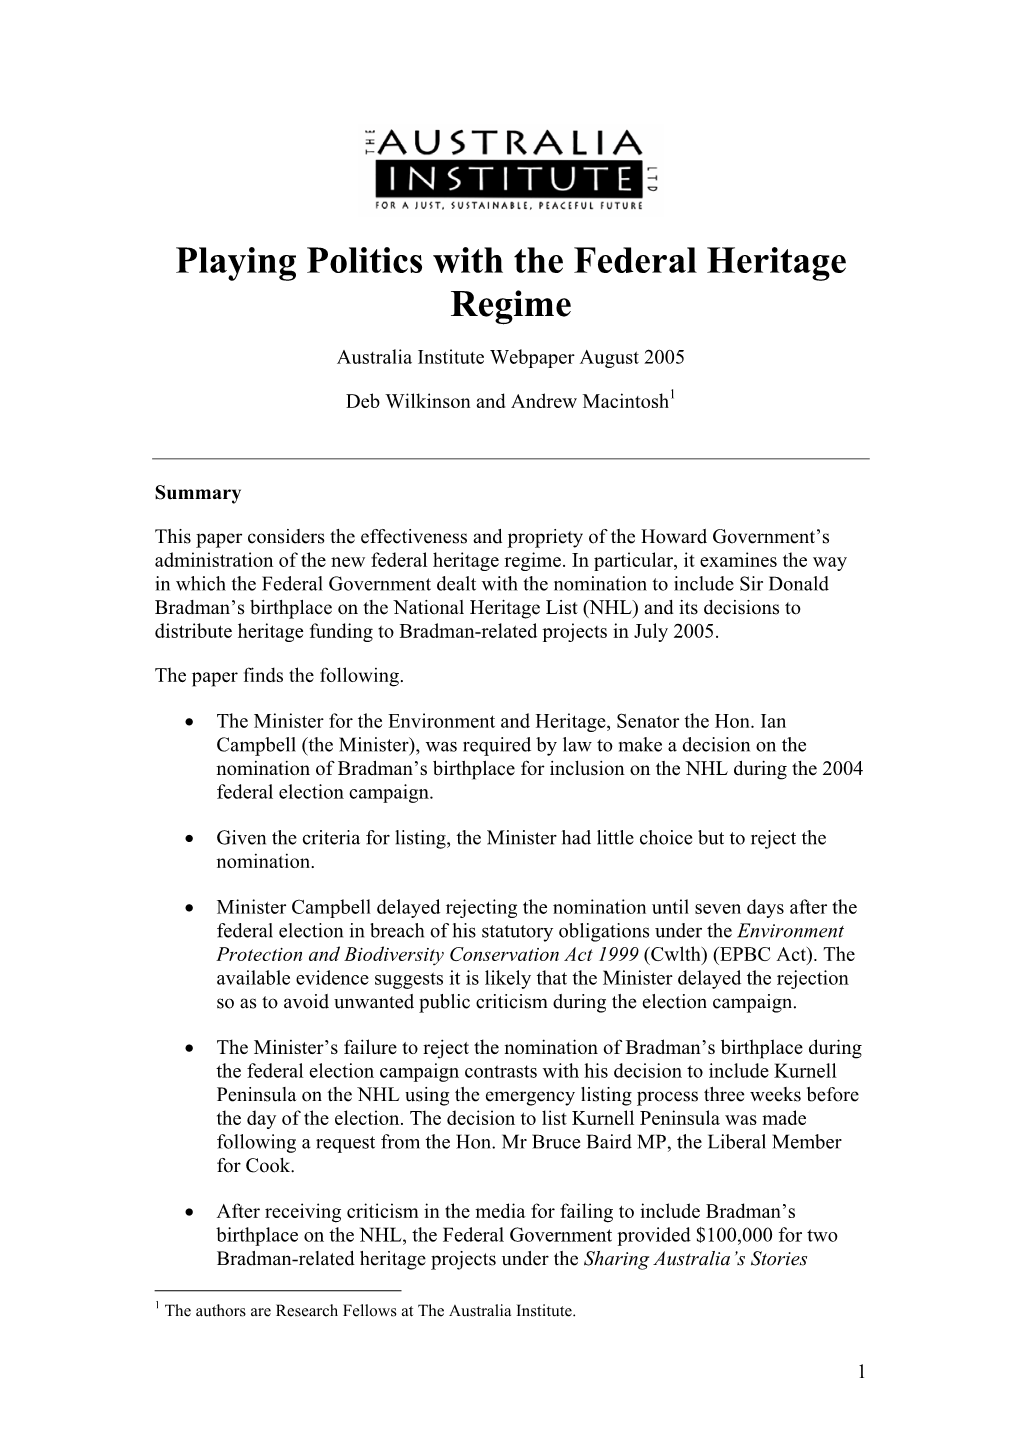 Playing Politics with the Federal Heritage Regime